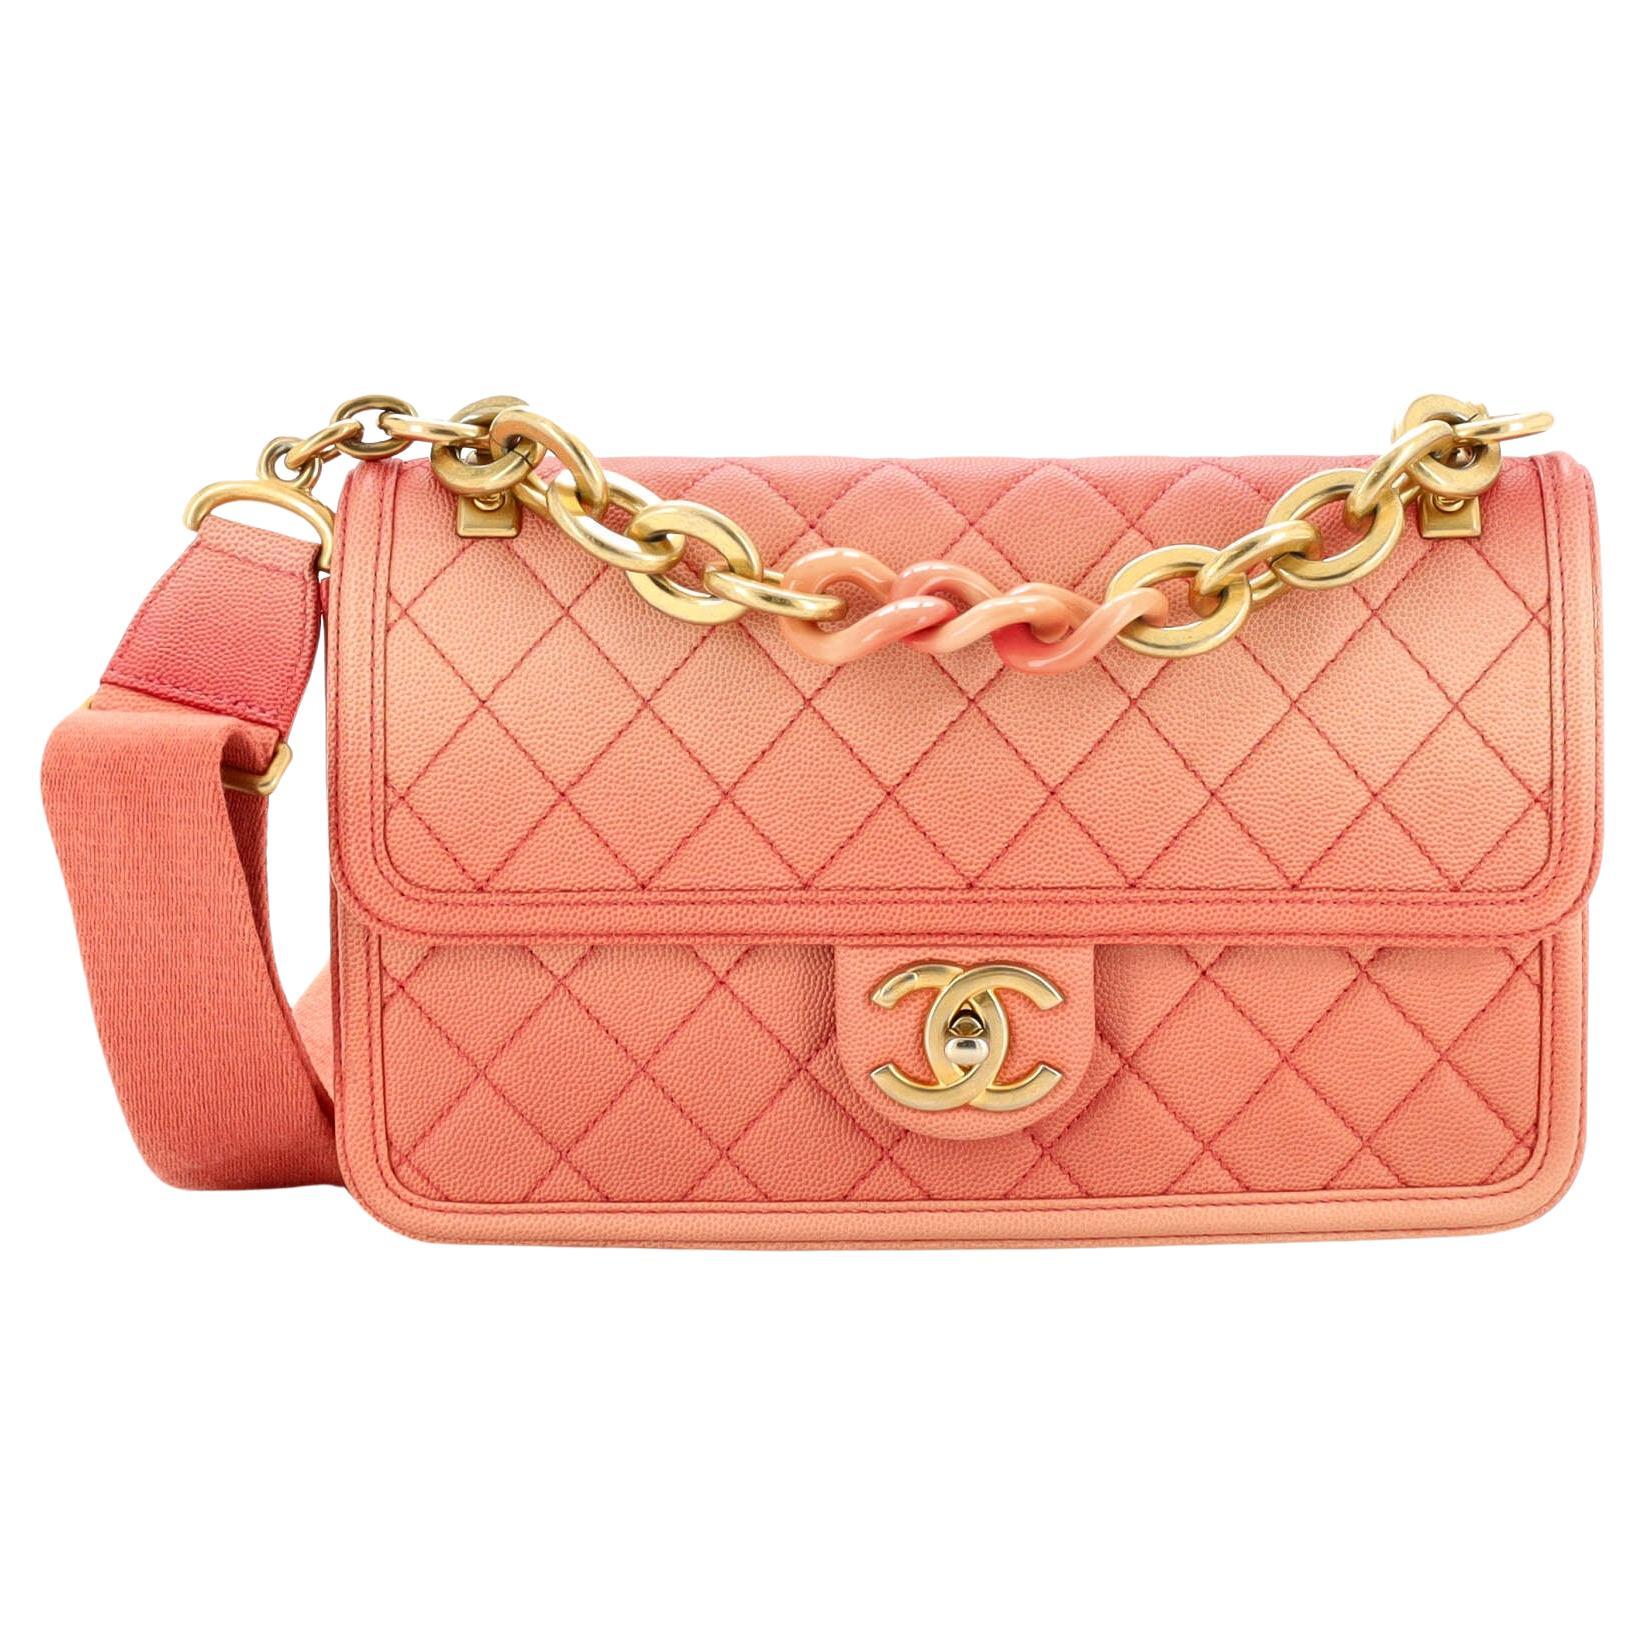 Chanel Orange Quilted Caviar Small Sunset On The Sea Flap Bag